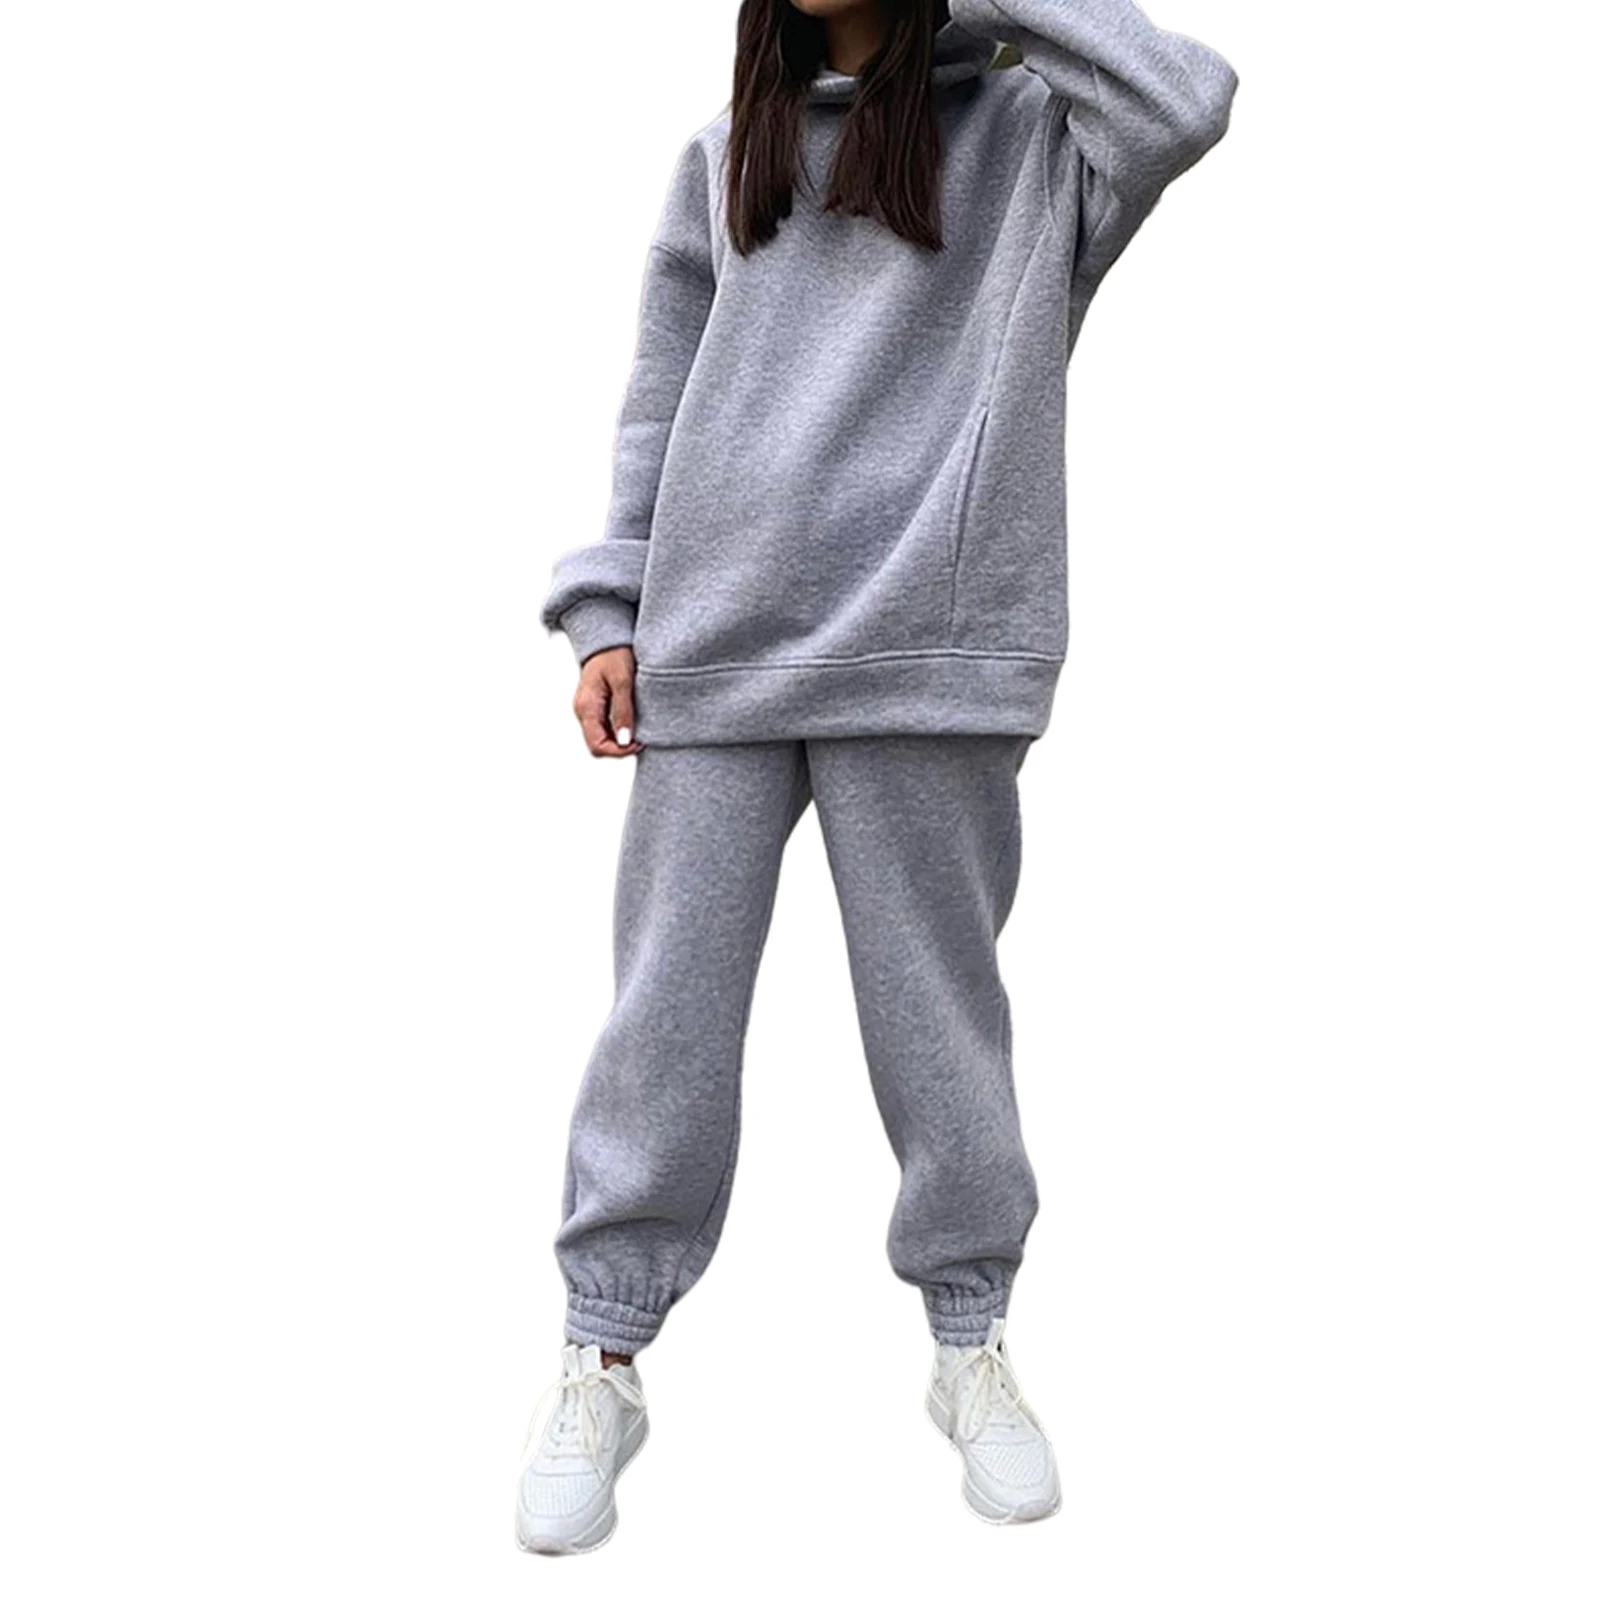 sweatshirts for girls Women's Autumn Plus Fleece Sweatshirts Tracksuit Two Piece Set Casual Oversized Solid Female Sports Hoodie Suit Long Pant Sets cropped hoodie